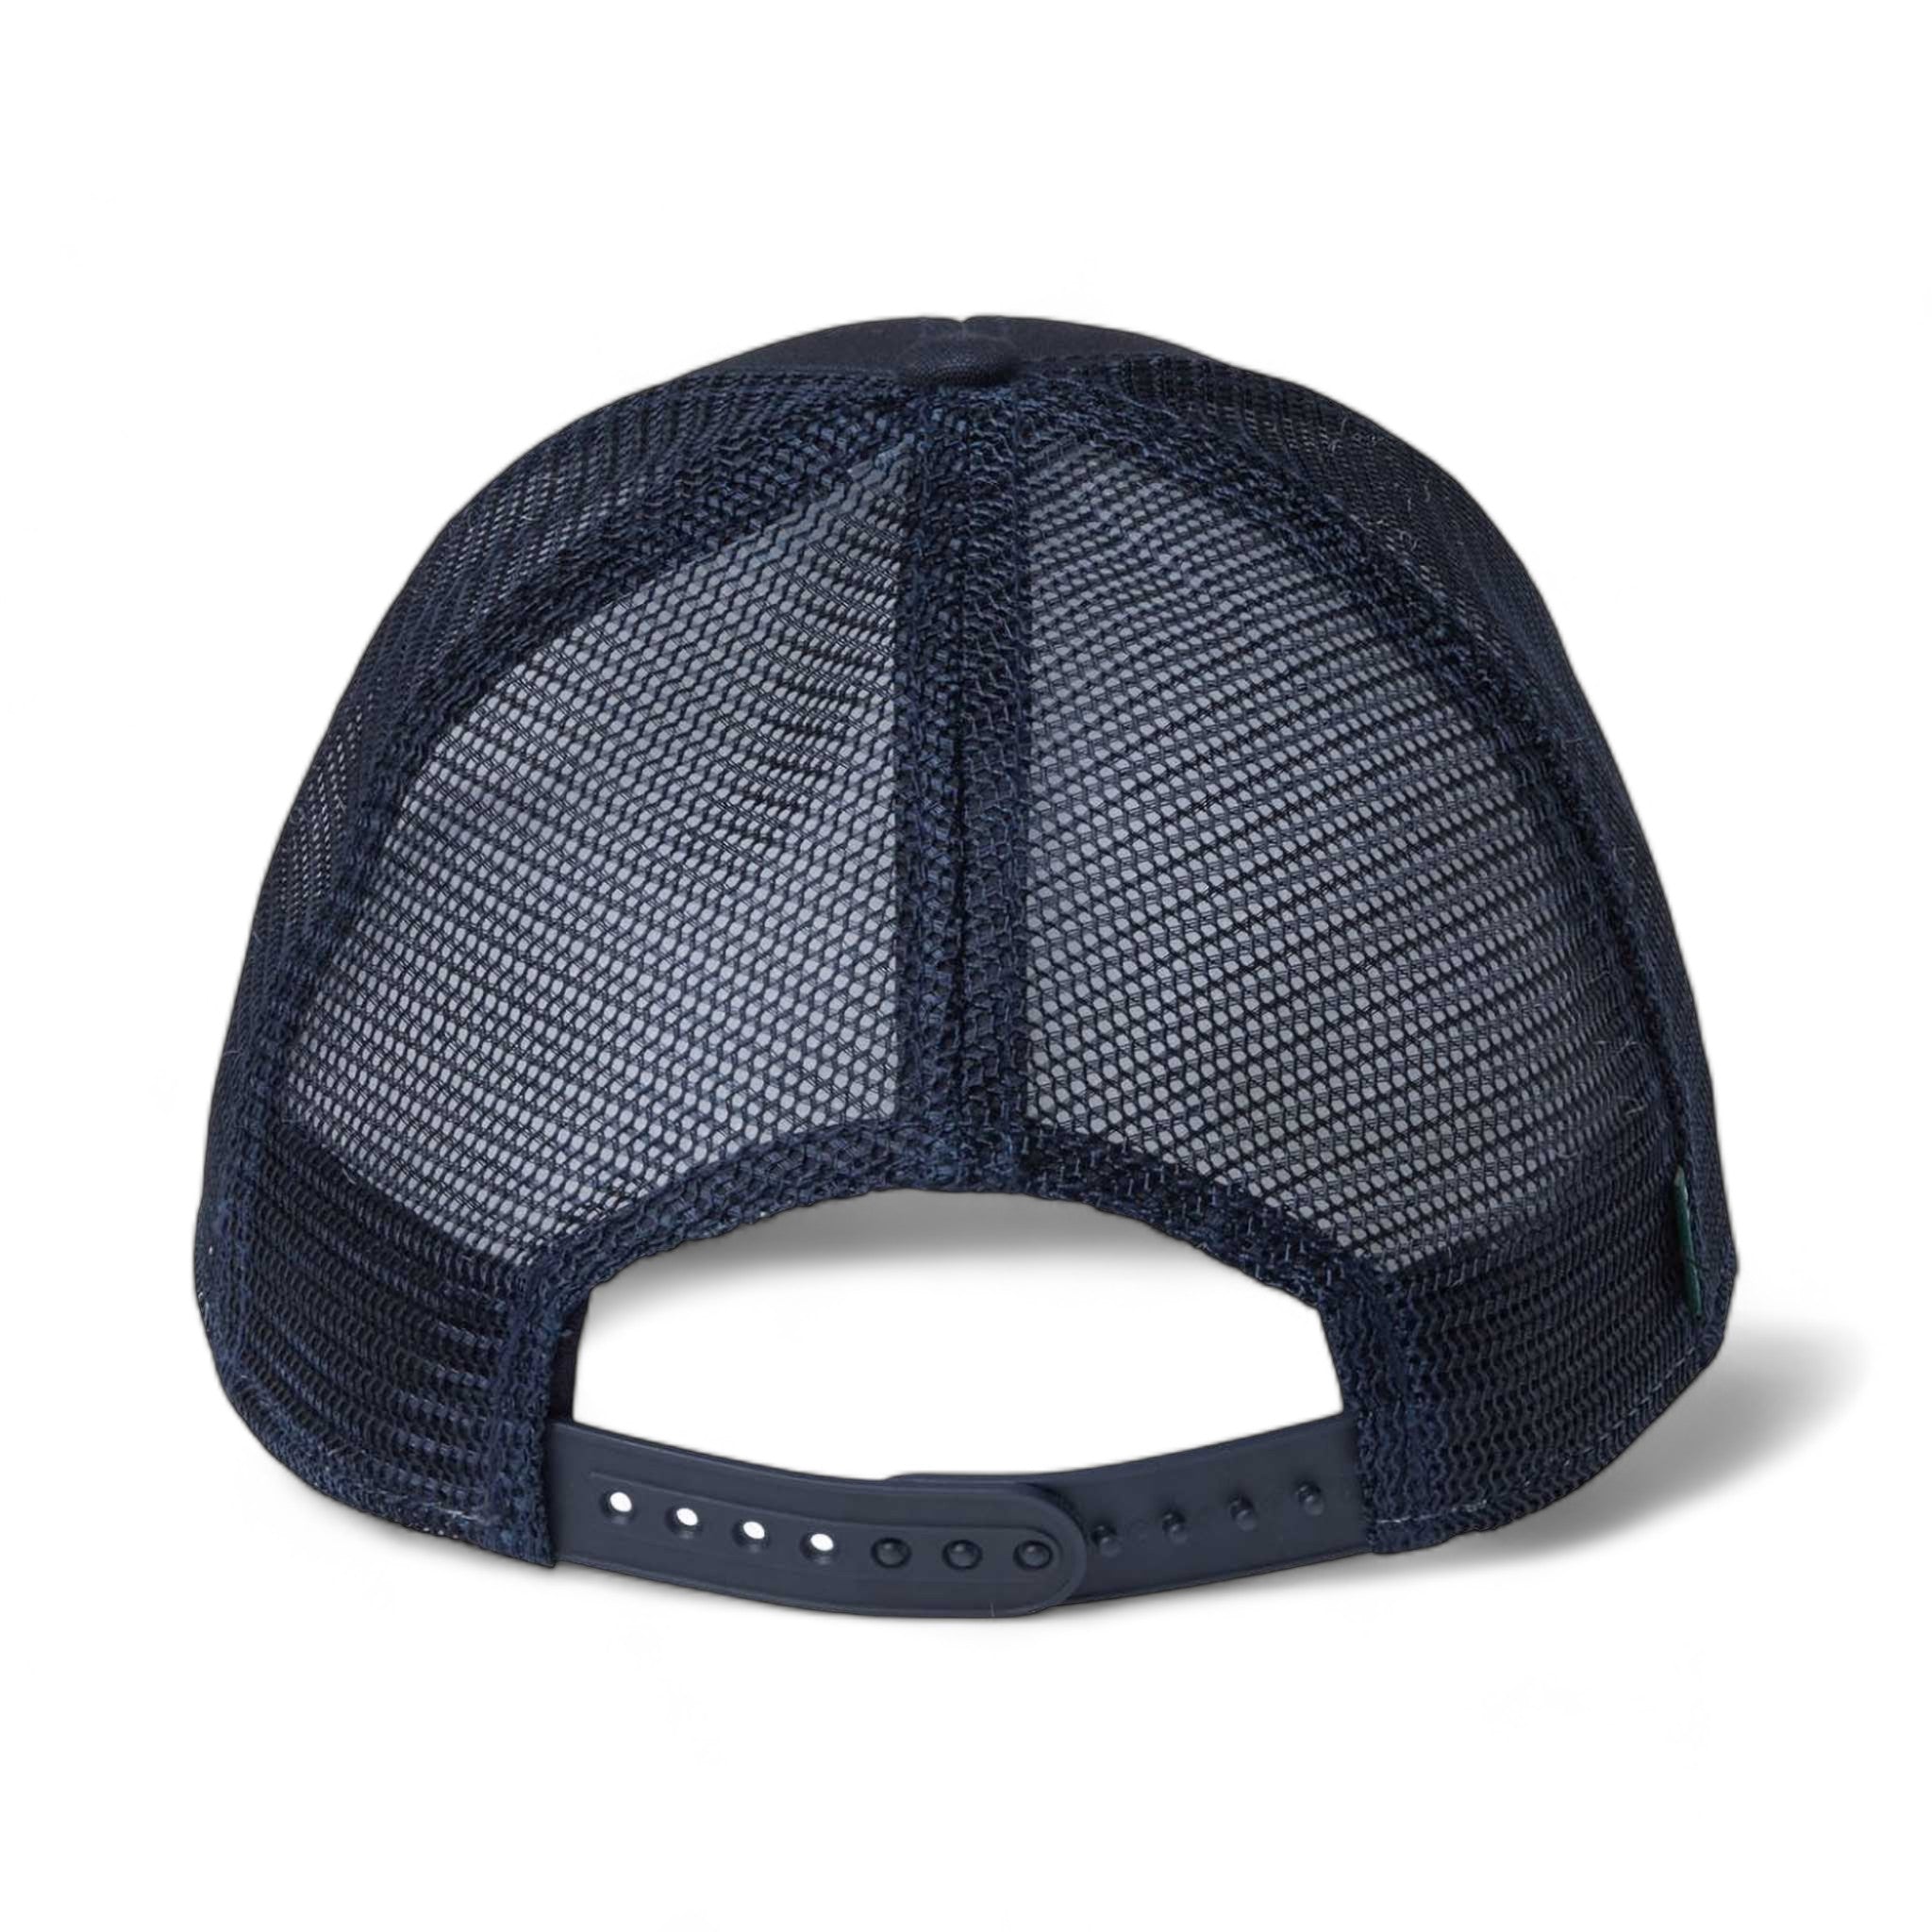 Back view of LEGACY LPS custom hat in navy and navy